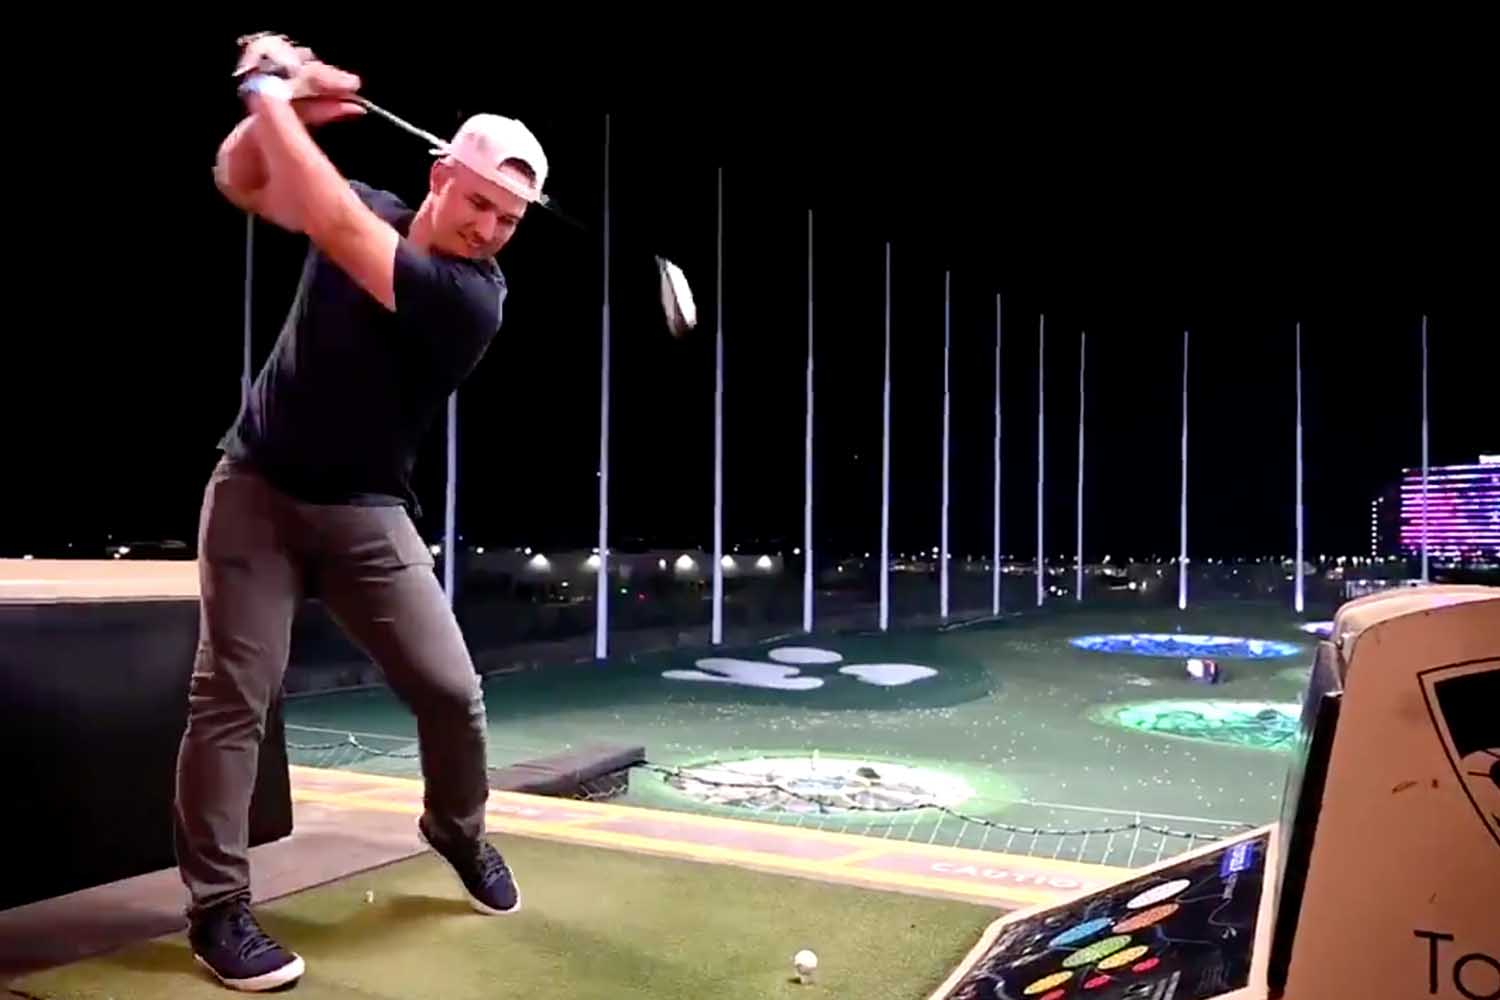 Watch Mike Trout Absolutely Demolish This Golf Ball